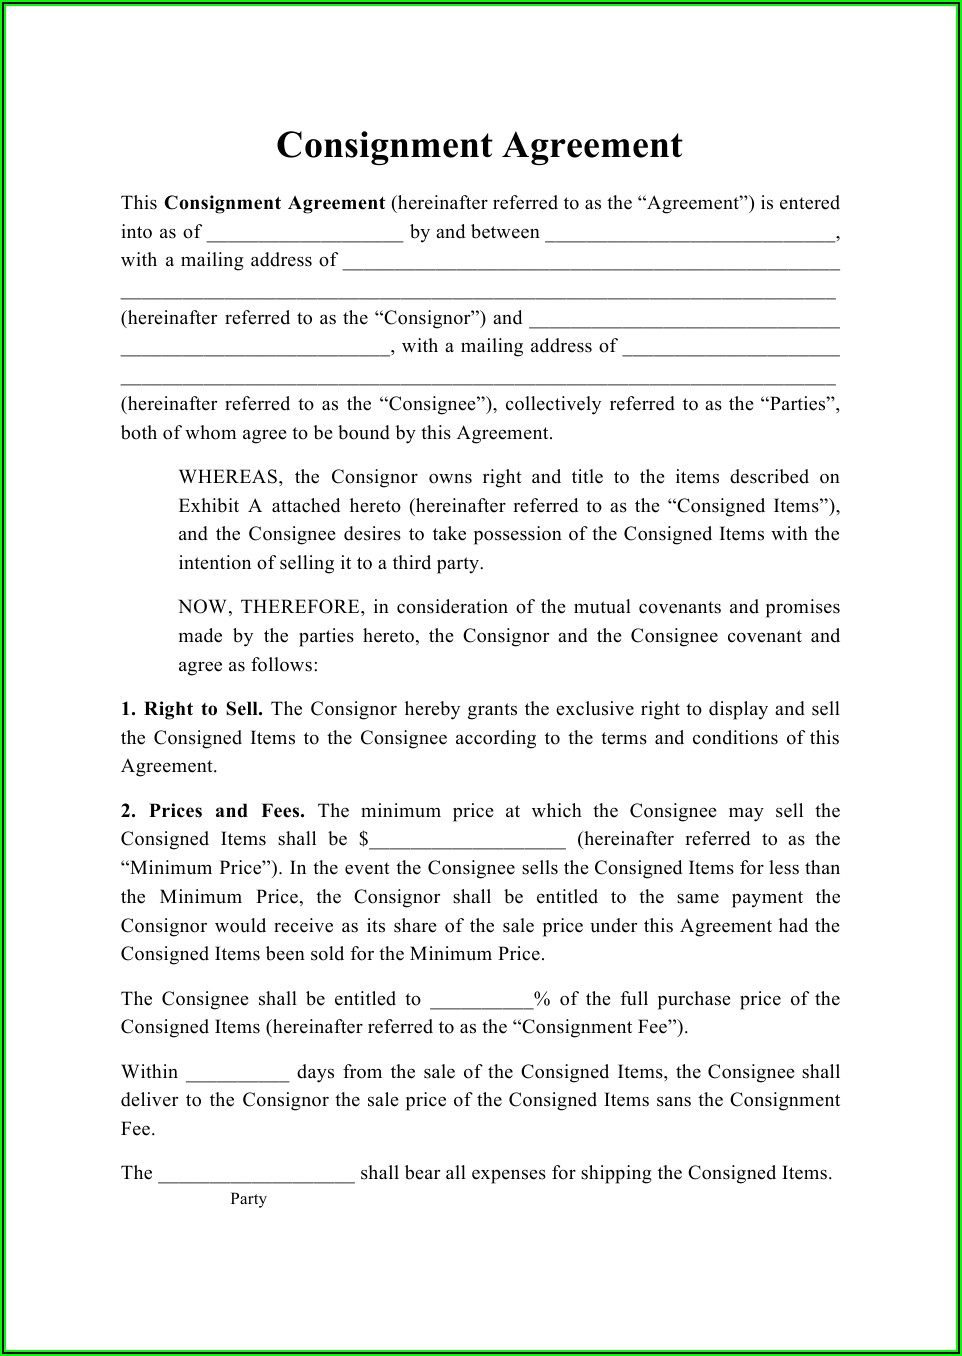 Basic Consignment Agreement Template